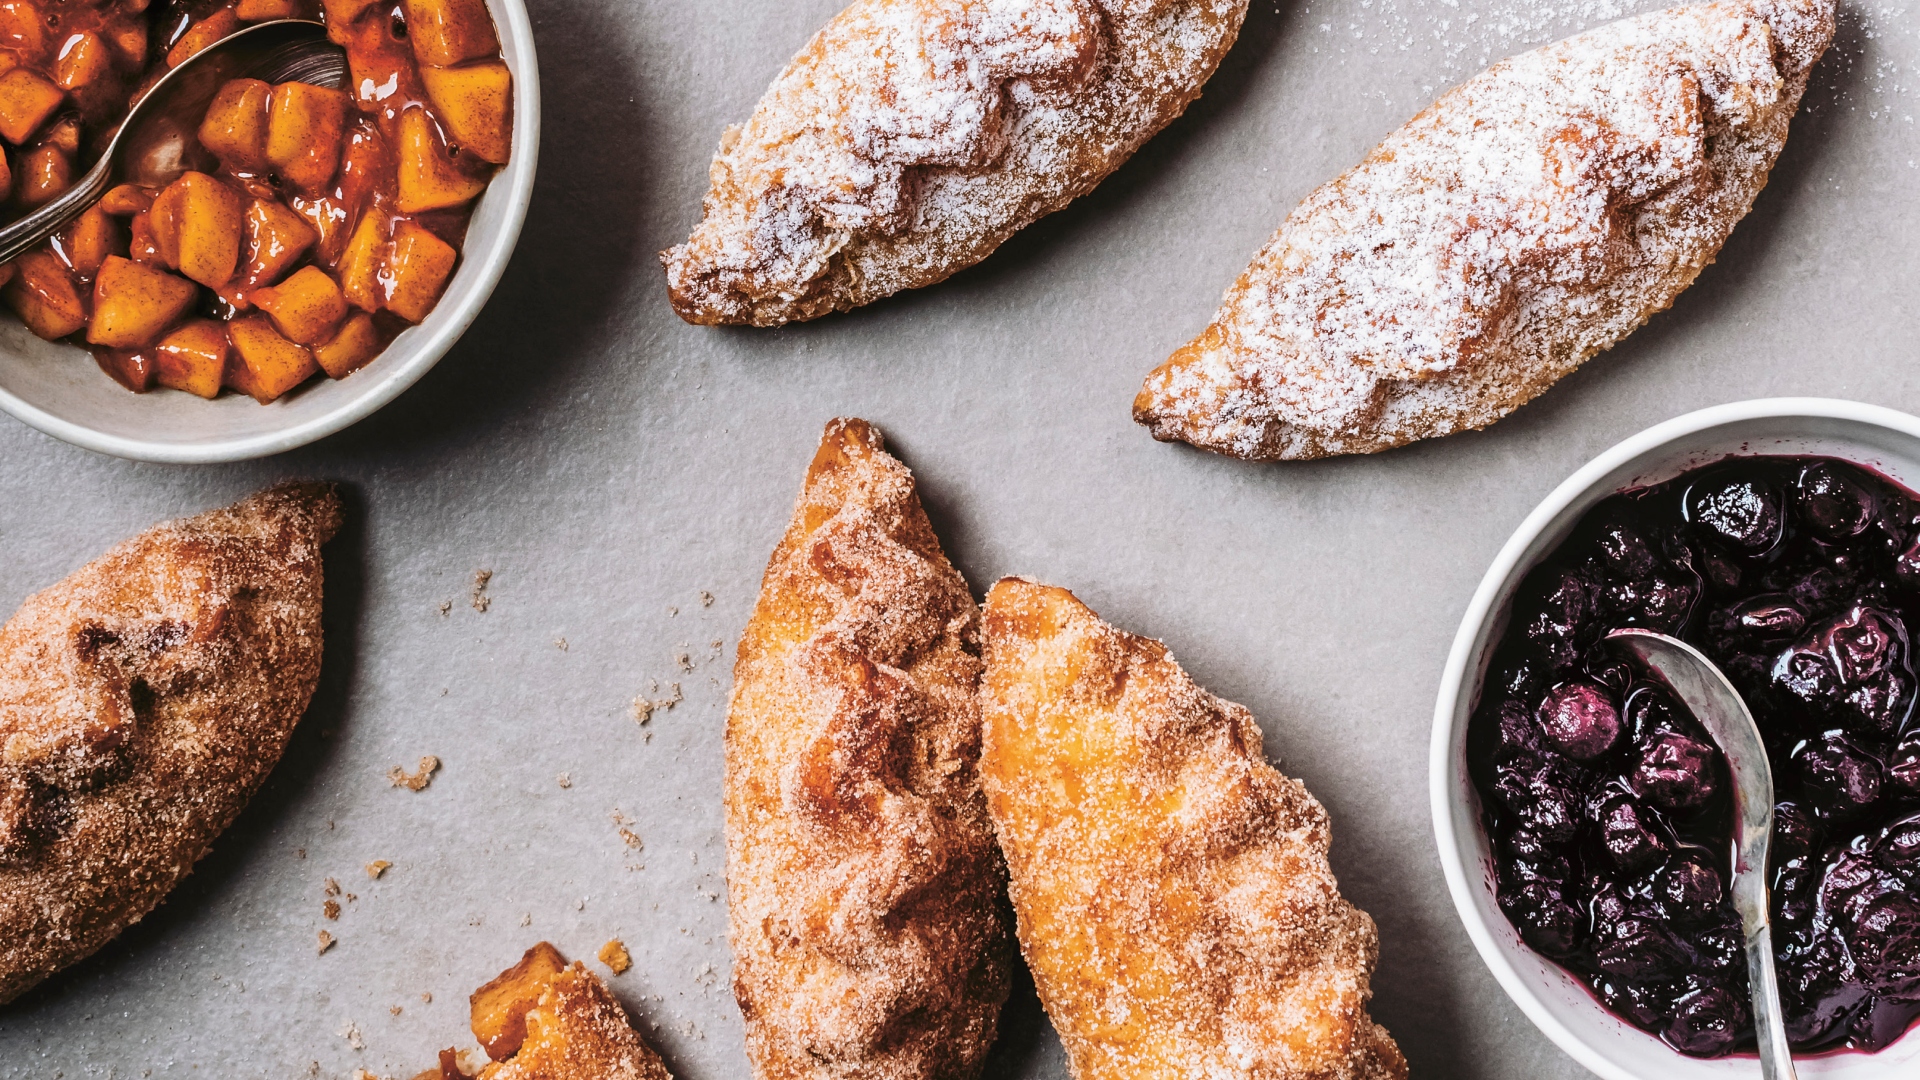 Fruit-filled hand pies